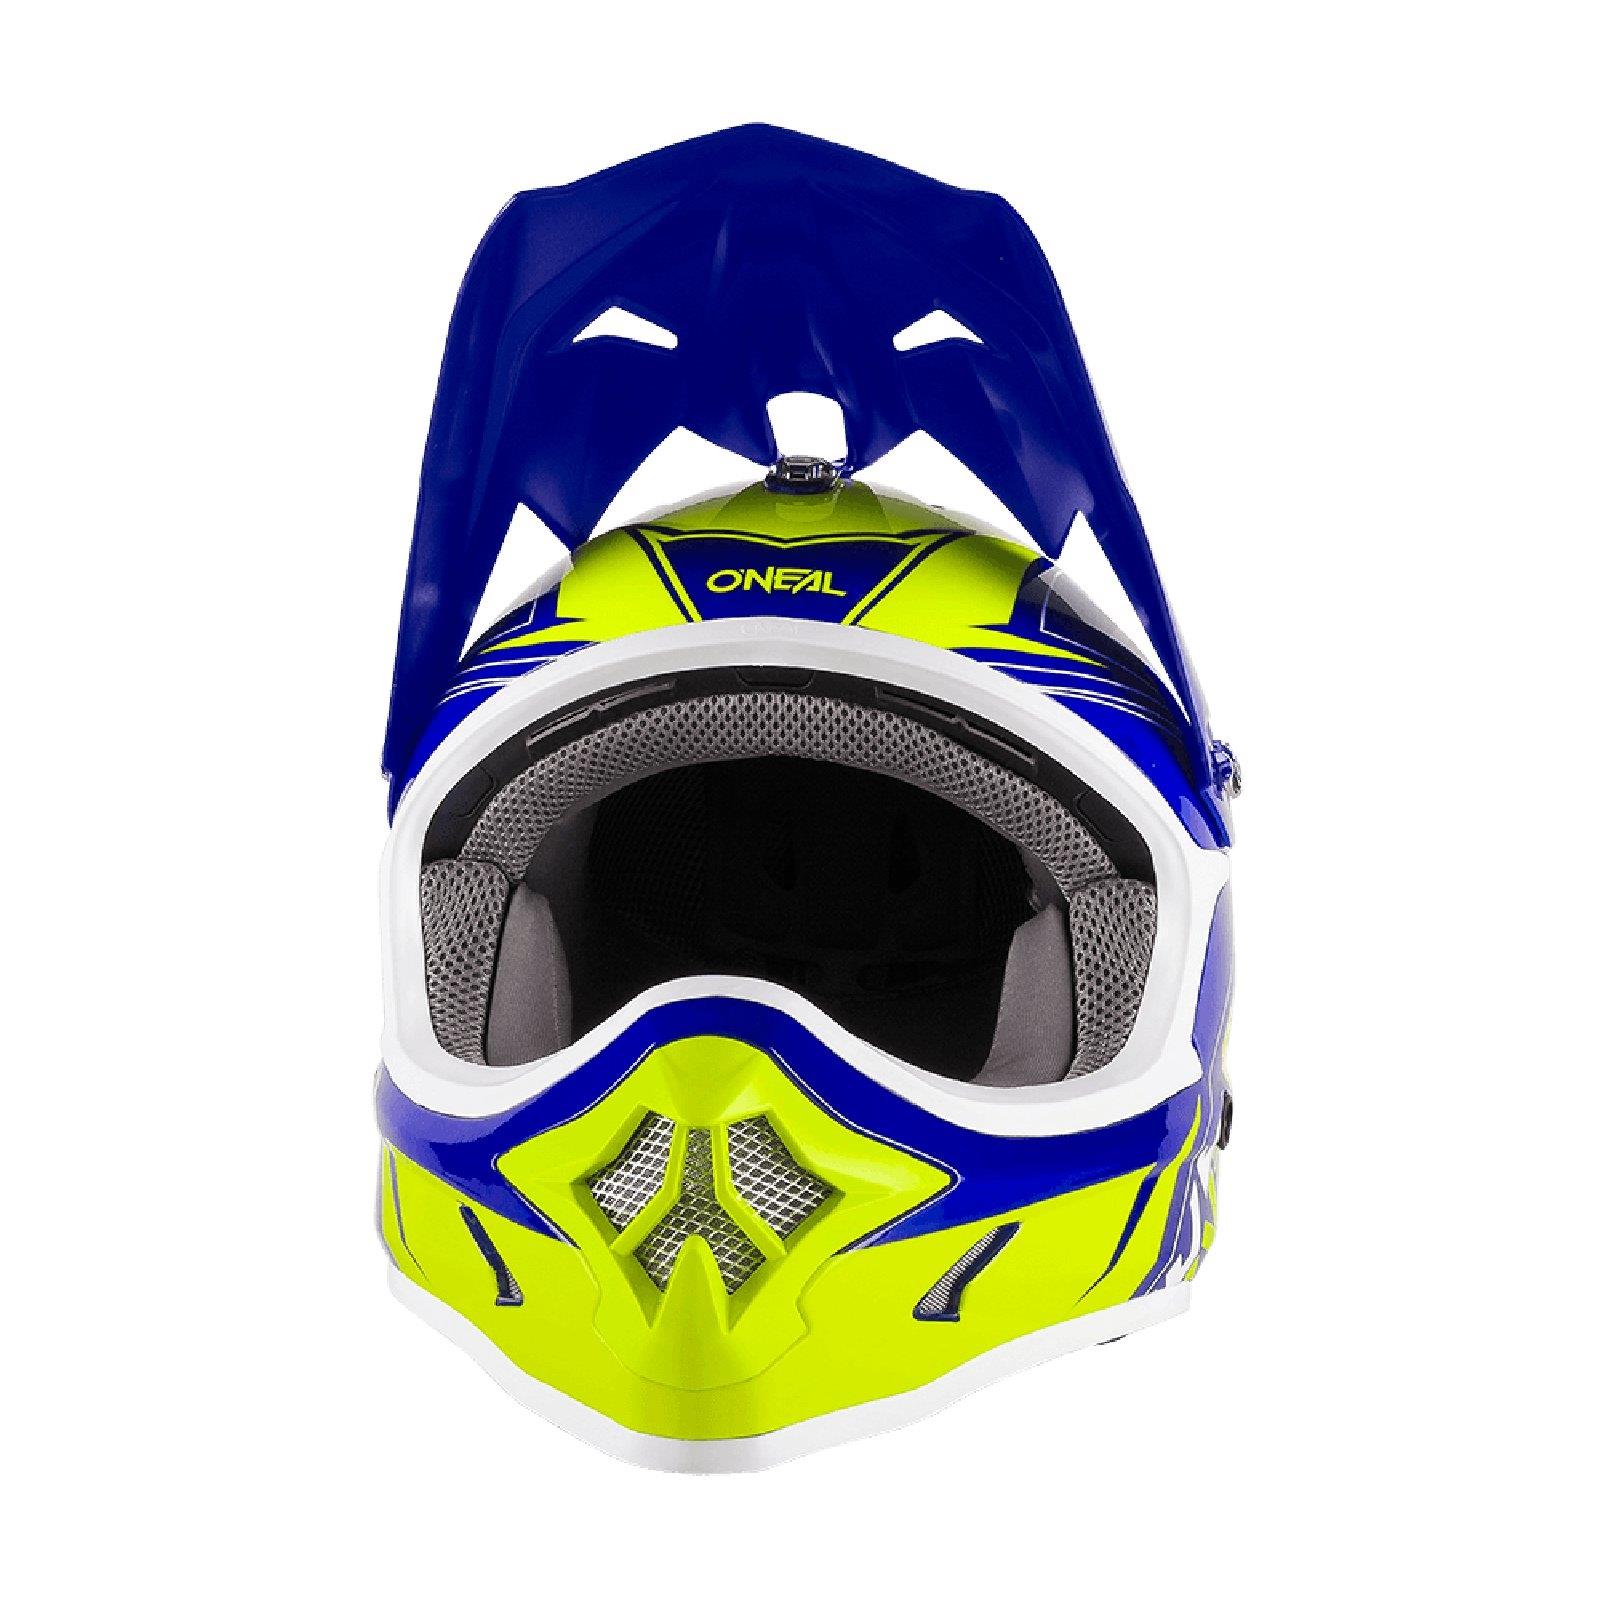 ONeal 2Series Synthy Kinder Moto Cross MX Helm Youth Enduro Quad Kids Jugend 